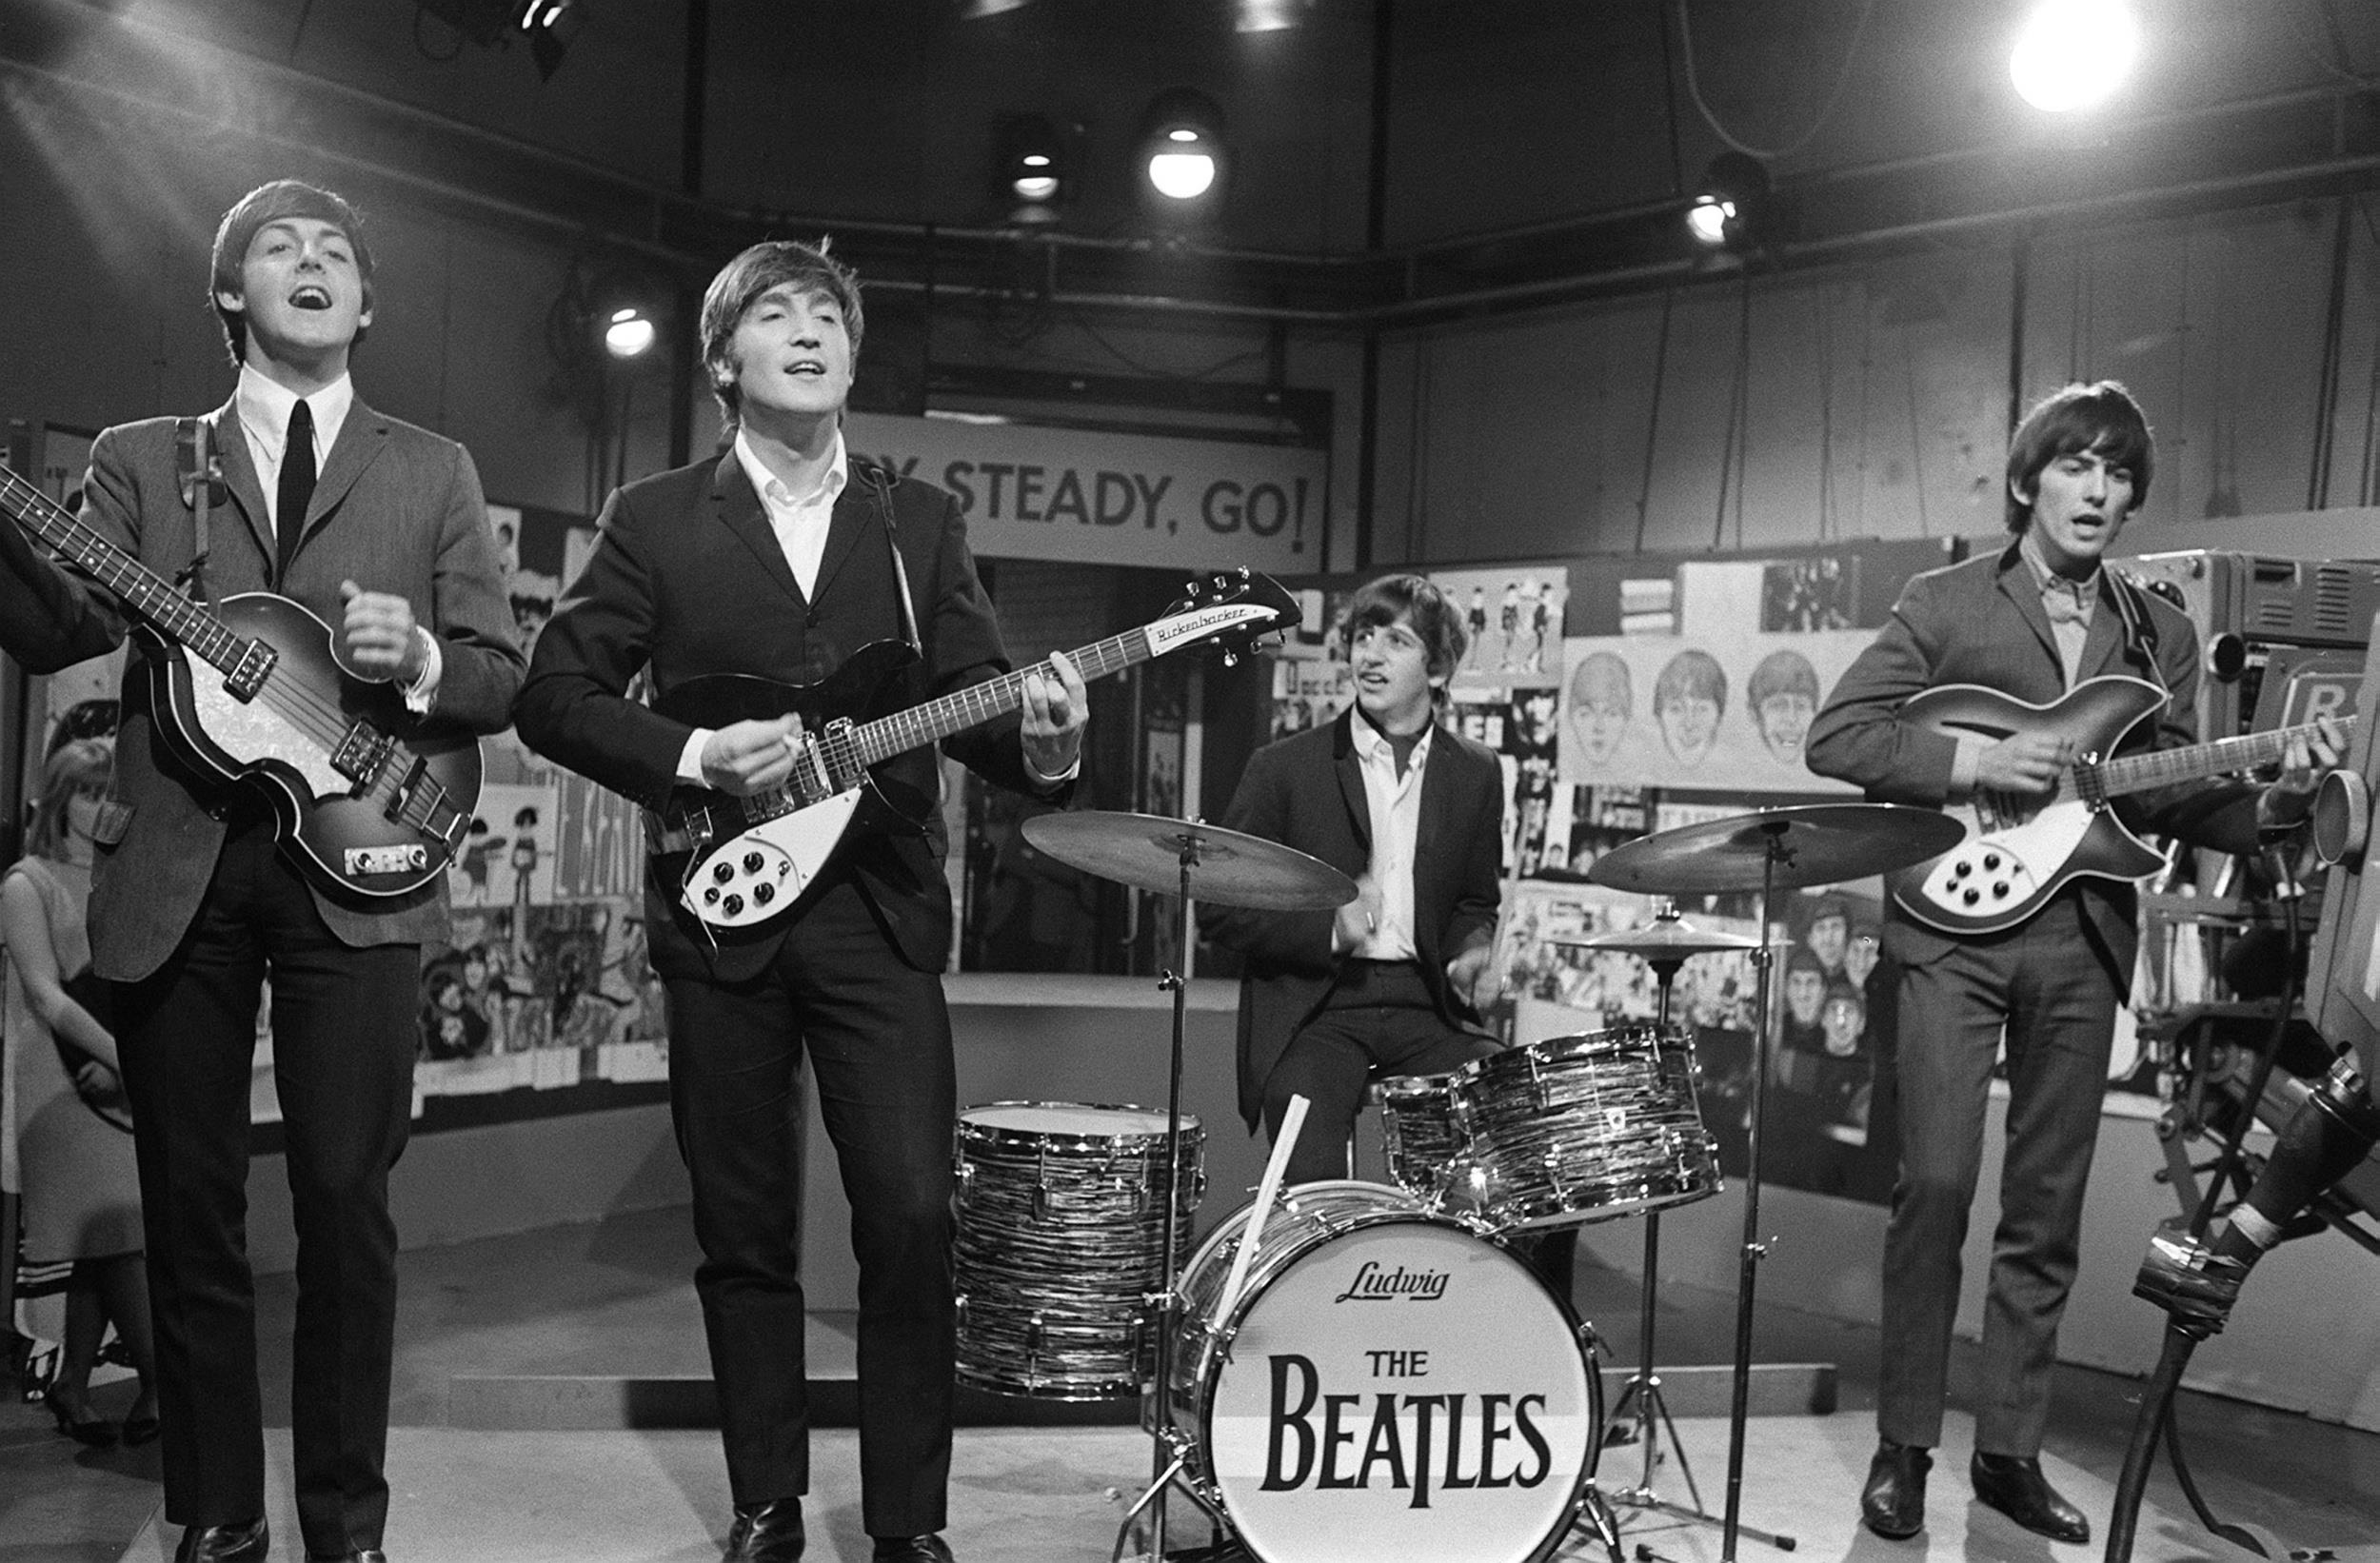 <p>This single could’ve been The Beatles’ breakthrough hit, but its airing on Nov. 22, 1963 broadcast of the “CBS Morning News” — which was to be repeated that evening — was overshadowed by the assassination of President John F. Kennedy. The song became a hit following the band’s historic performance on “The Ed Sullivan Show" and is as synonymous with Beatlemania as “I Want to Hold Your Hand." In terms of authorship, it’s a 50-50 Lennon-McCartney joint, with the duo sharing lead singing duties.</p><p><a href='https://www.msn.com/en-us/community/channel/vid-cj9pqbr0vn9in2b6ddcd8sfgpfq6x6utp44fssrv6mc2gtybw0us'>Follow us on MSN to see more of our exclusive entertainment content.</a></p>